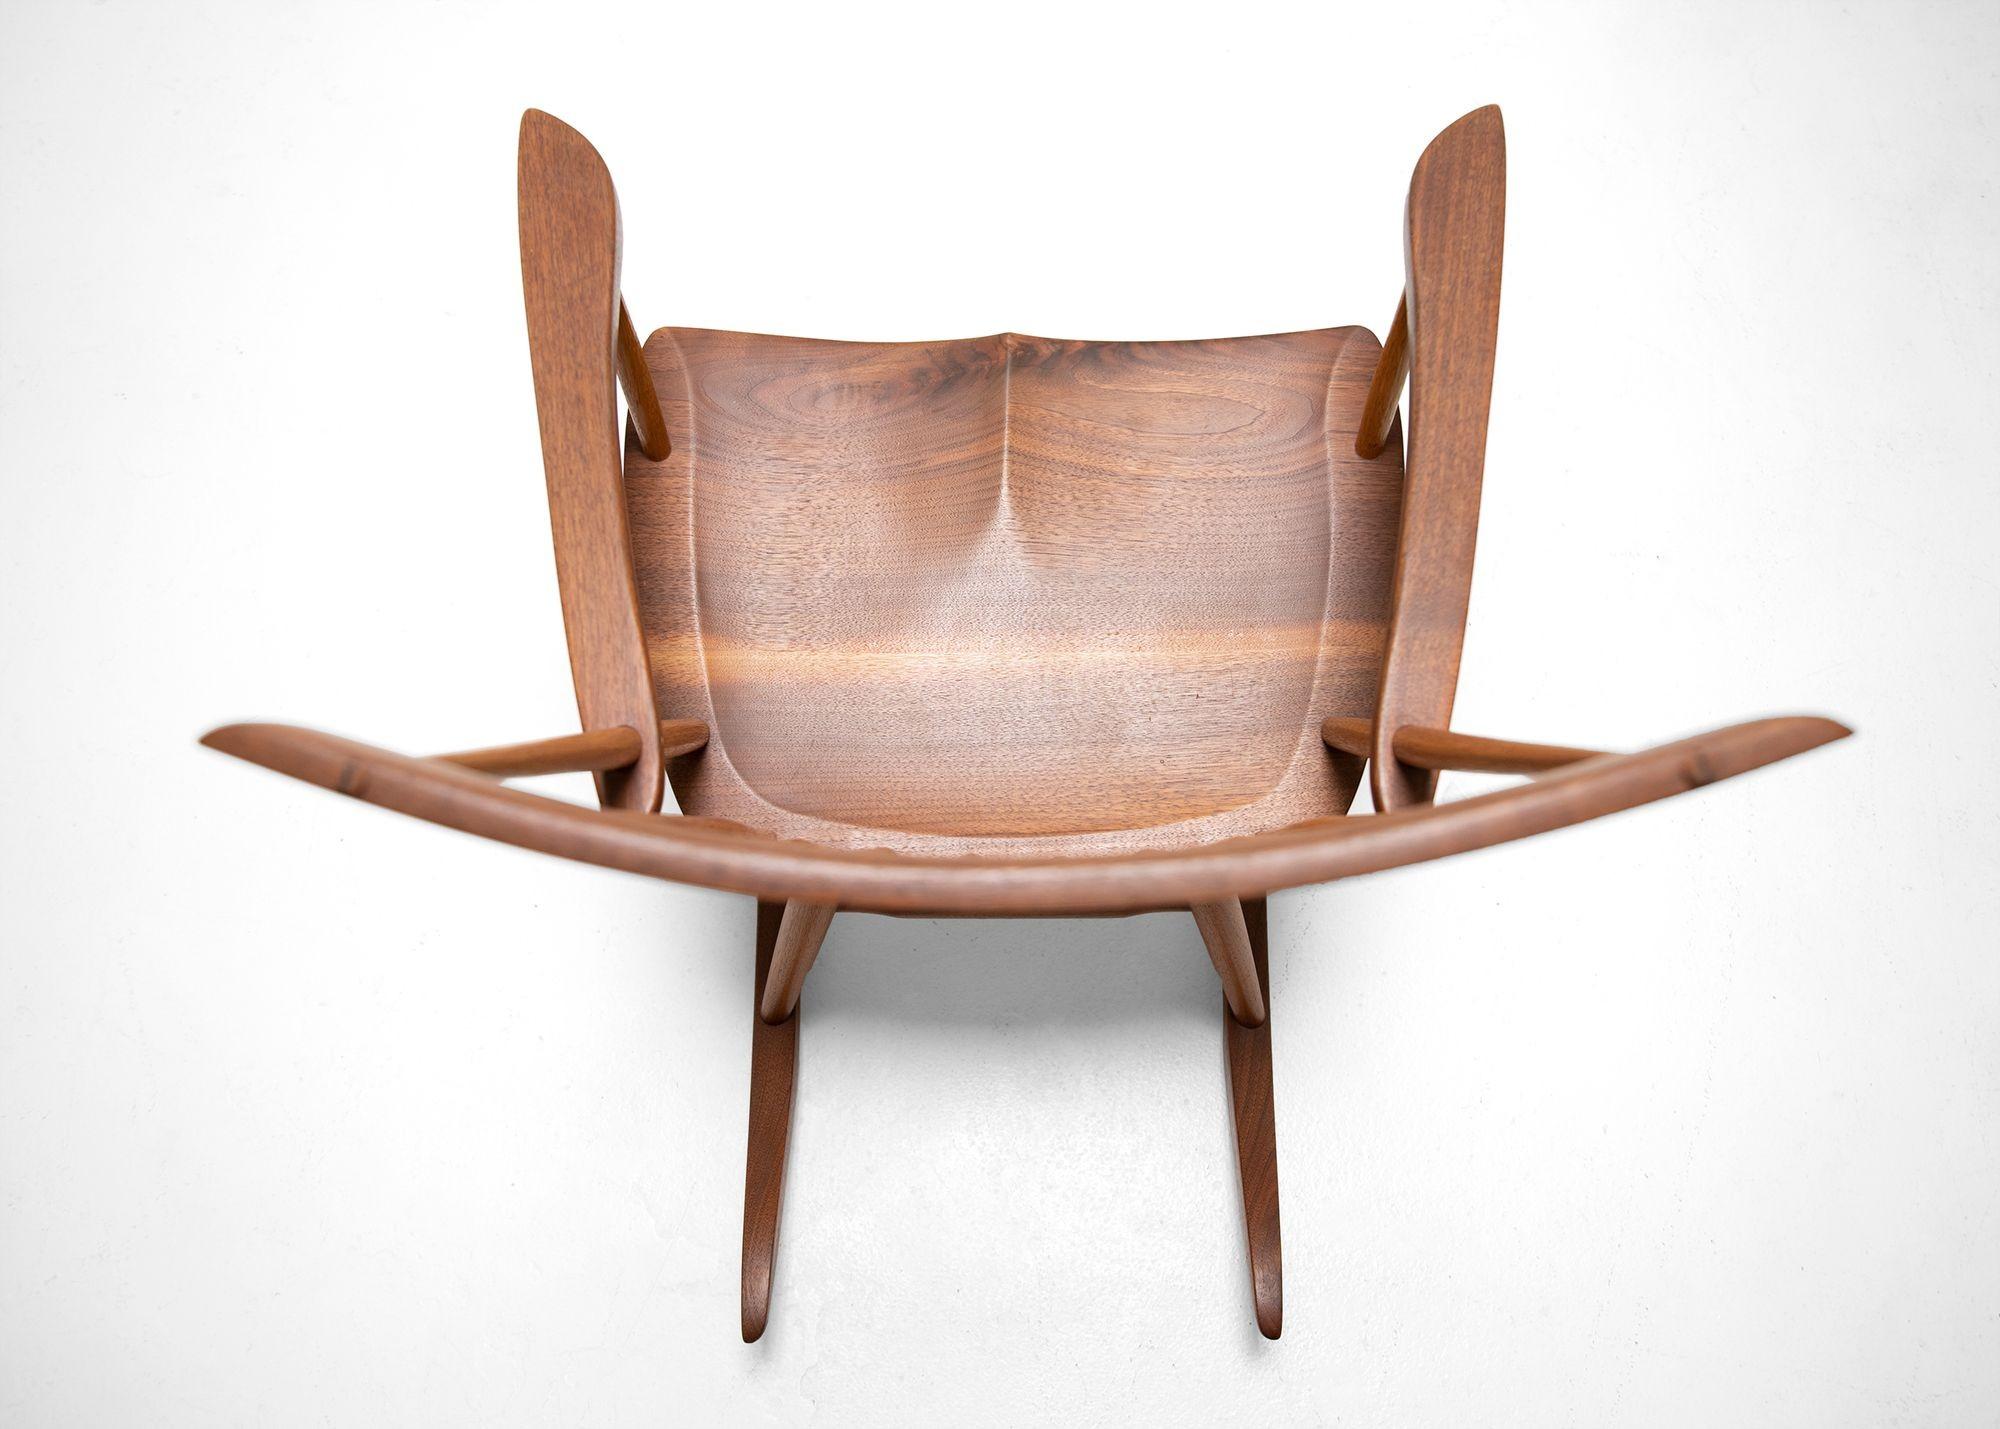 Hand-Carved George Nakashima New Chair Rocker in American Black Walnut and Hickory Signed